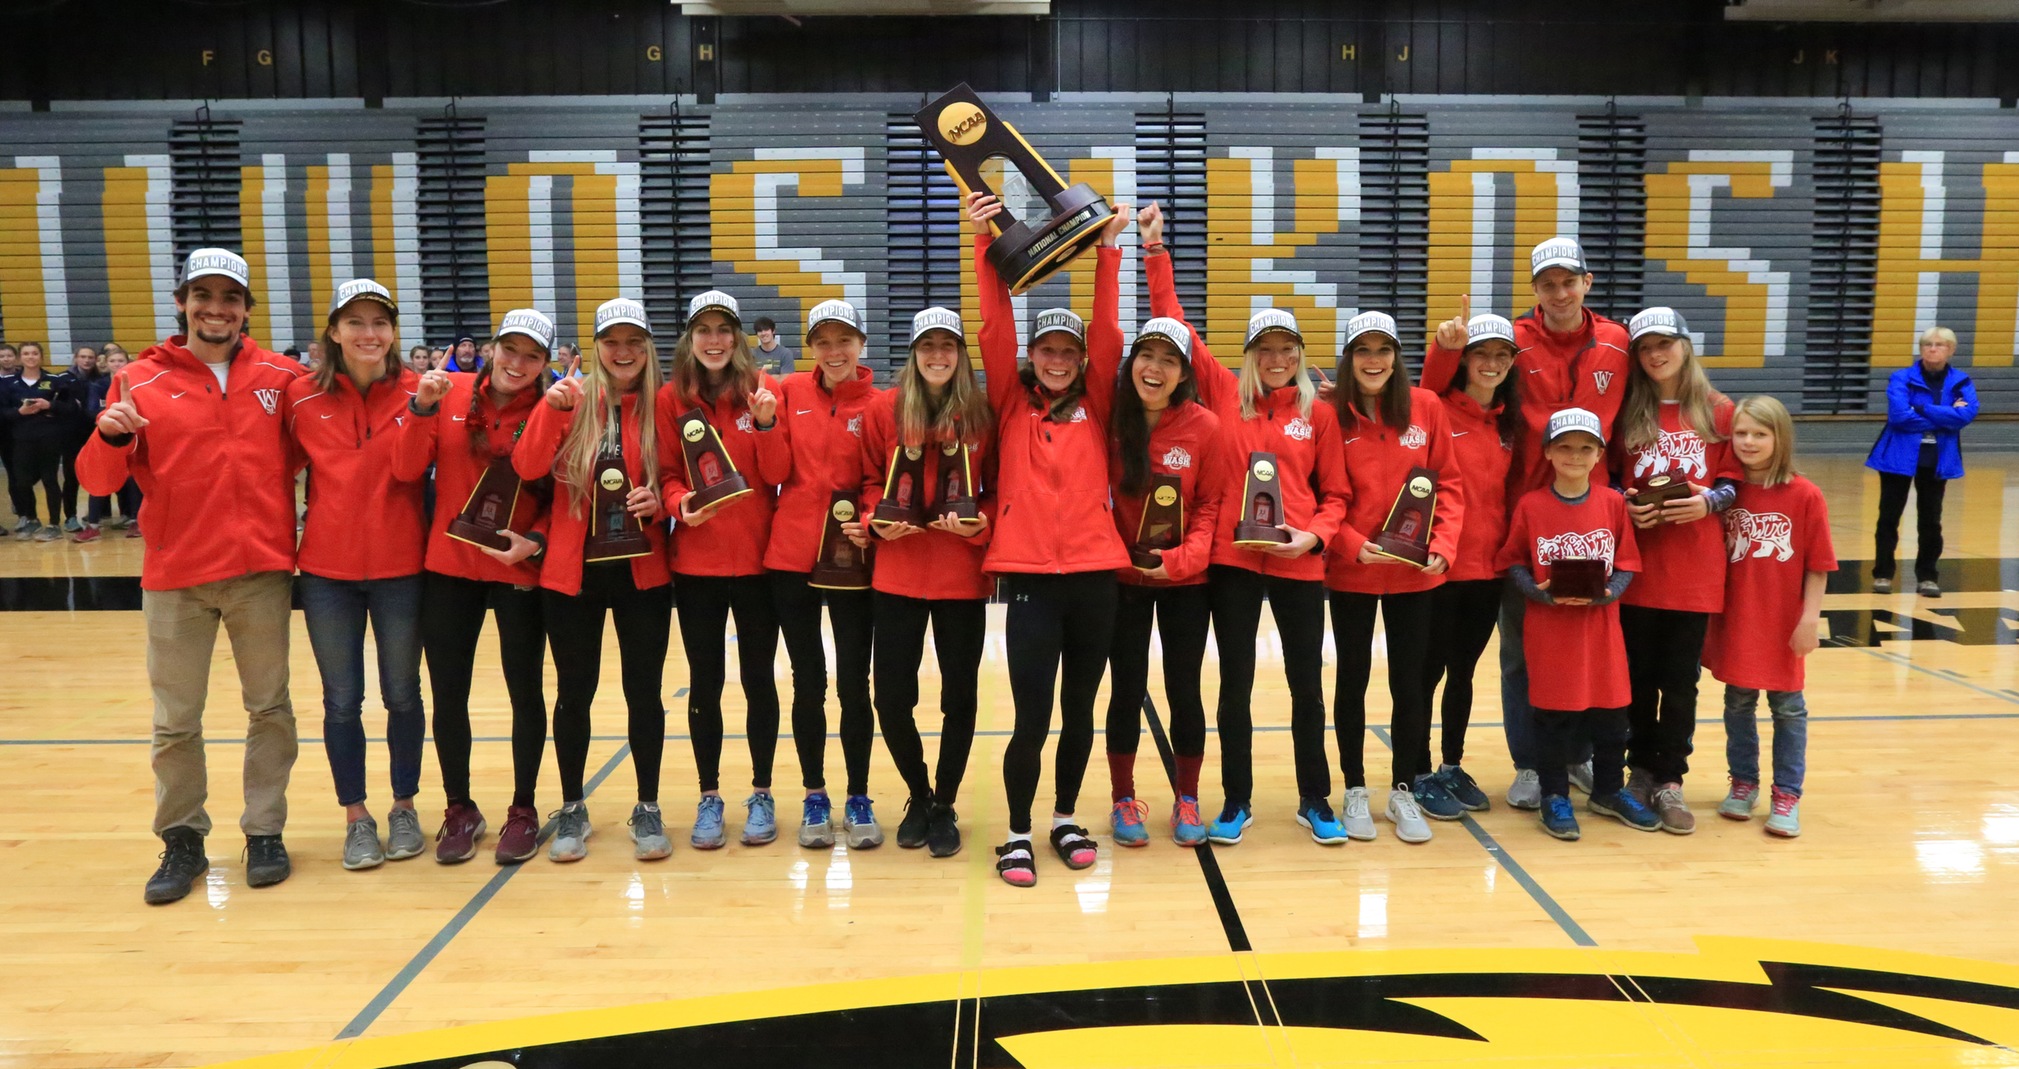 Washington University in St. Louis edged two-time defending champion Johns Hopkins University by one point for the team title.